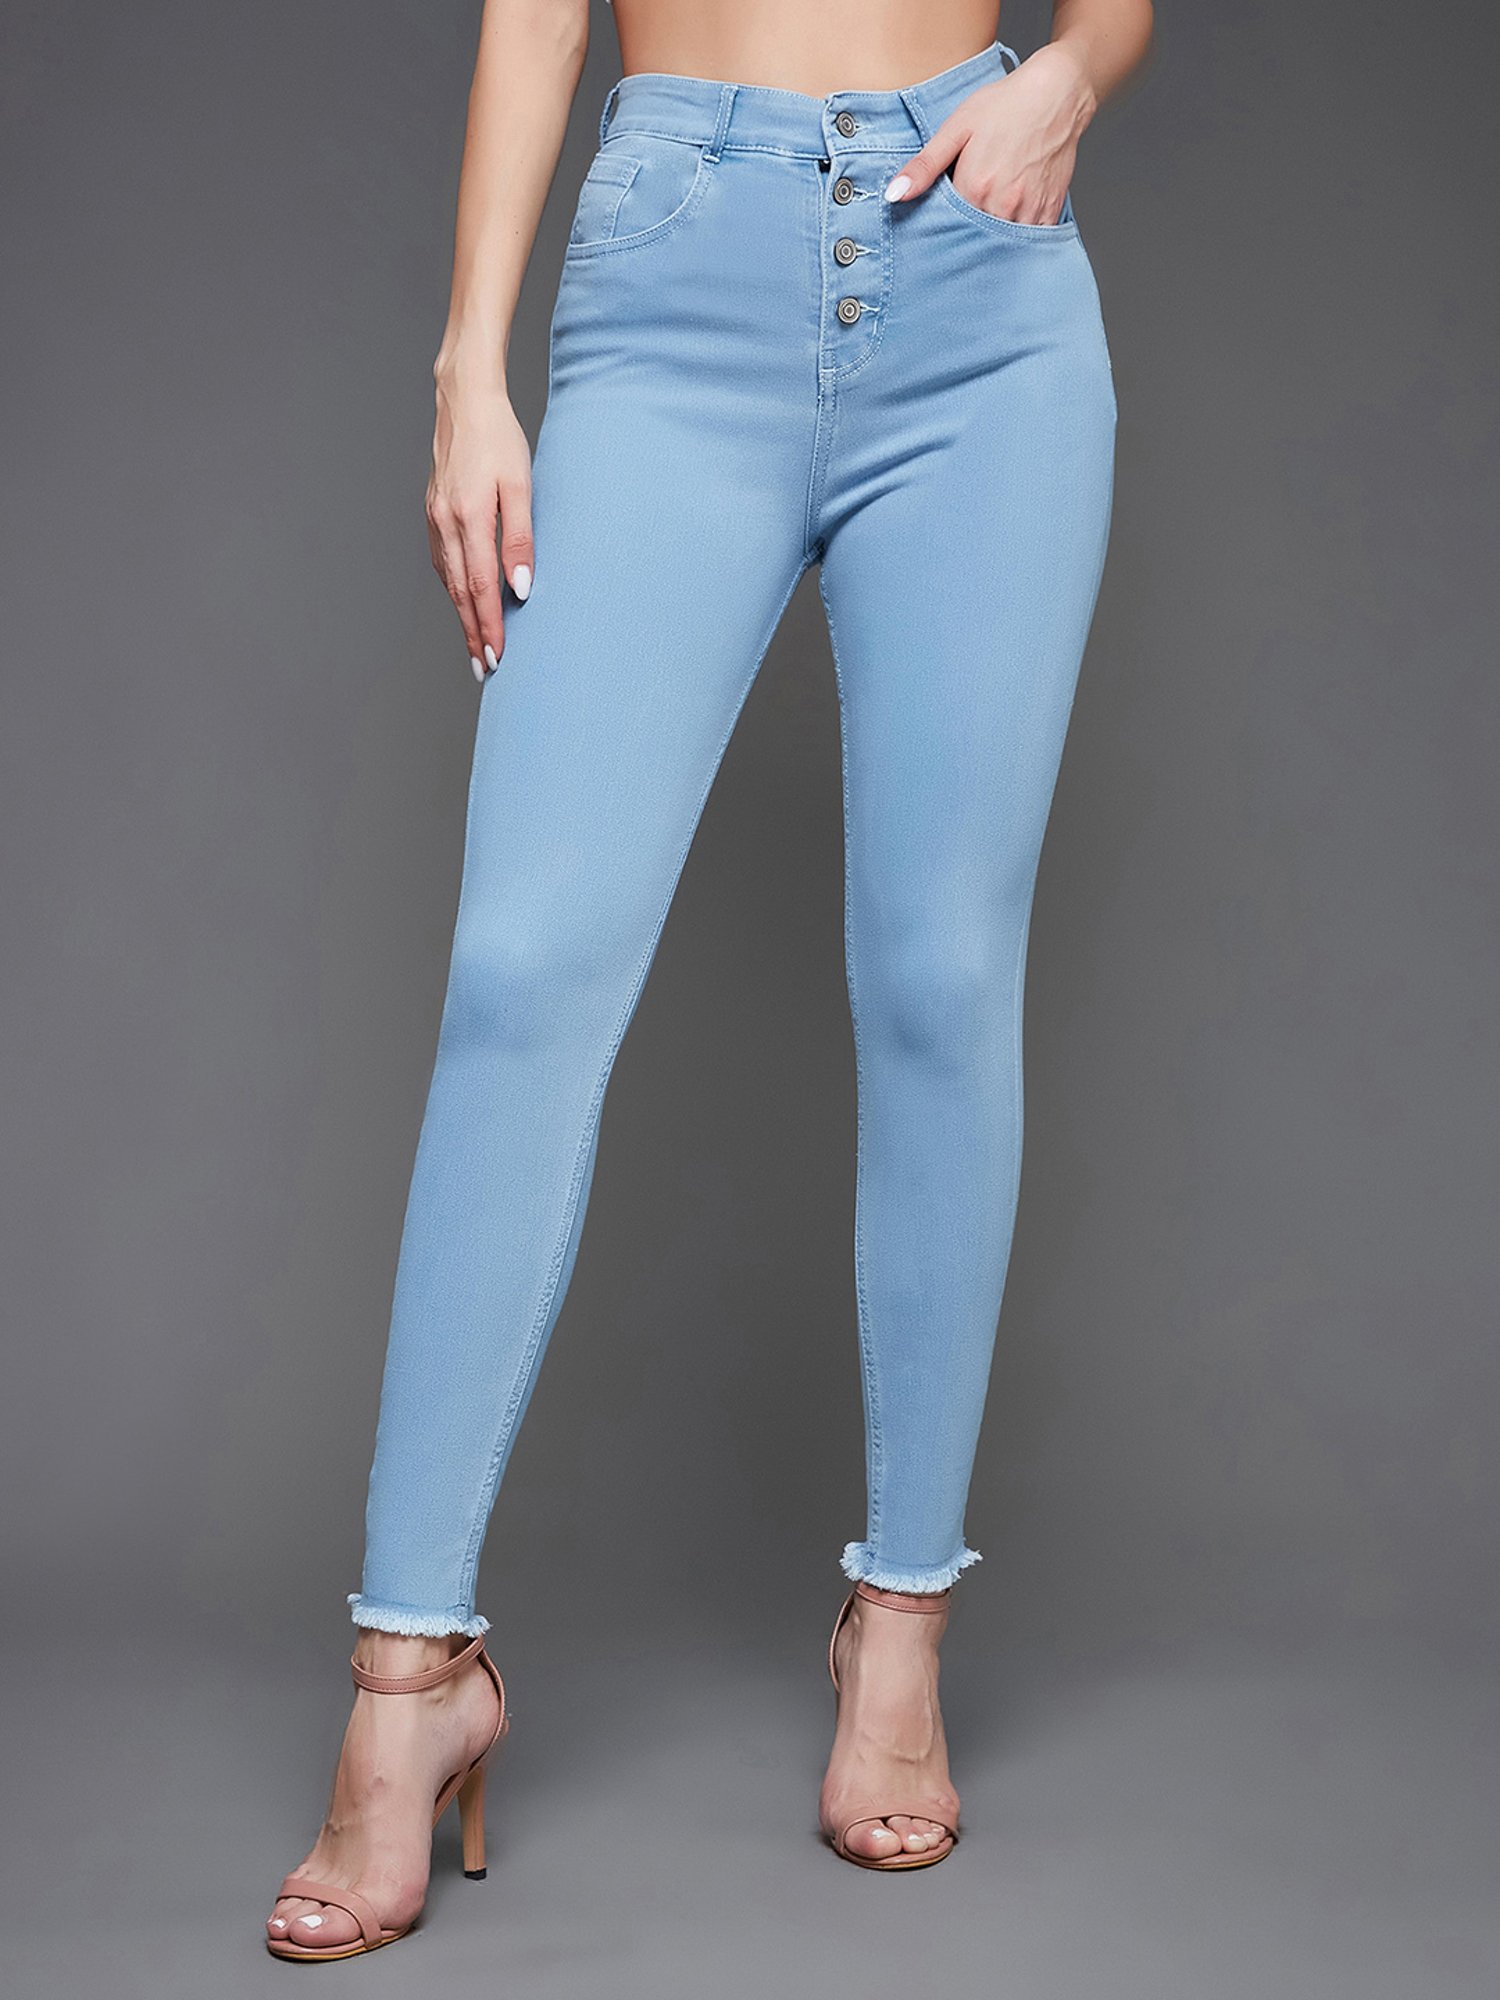 Buy SKYGLORY-High Waist Skinny Fit Jeans for Women, Girls-Stretchable  Trousers with Ankle Length-skyblue Online at Best Prices in India - JioMart.